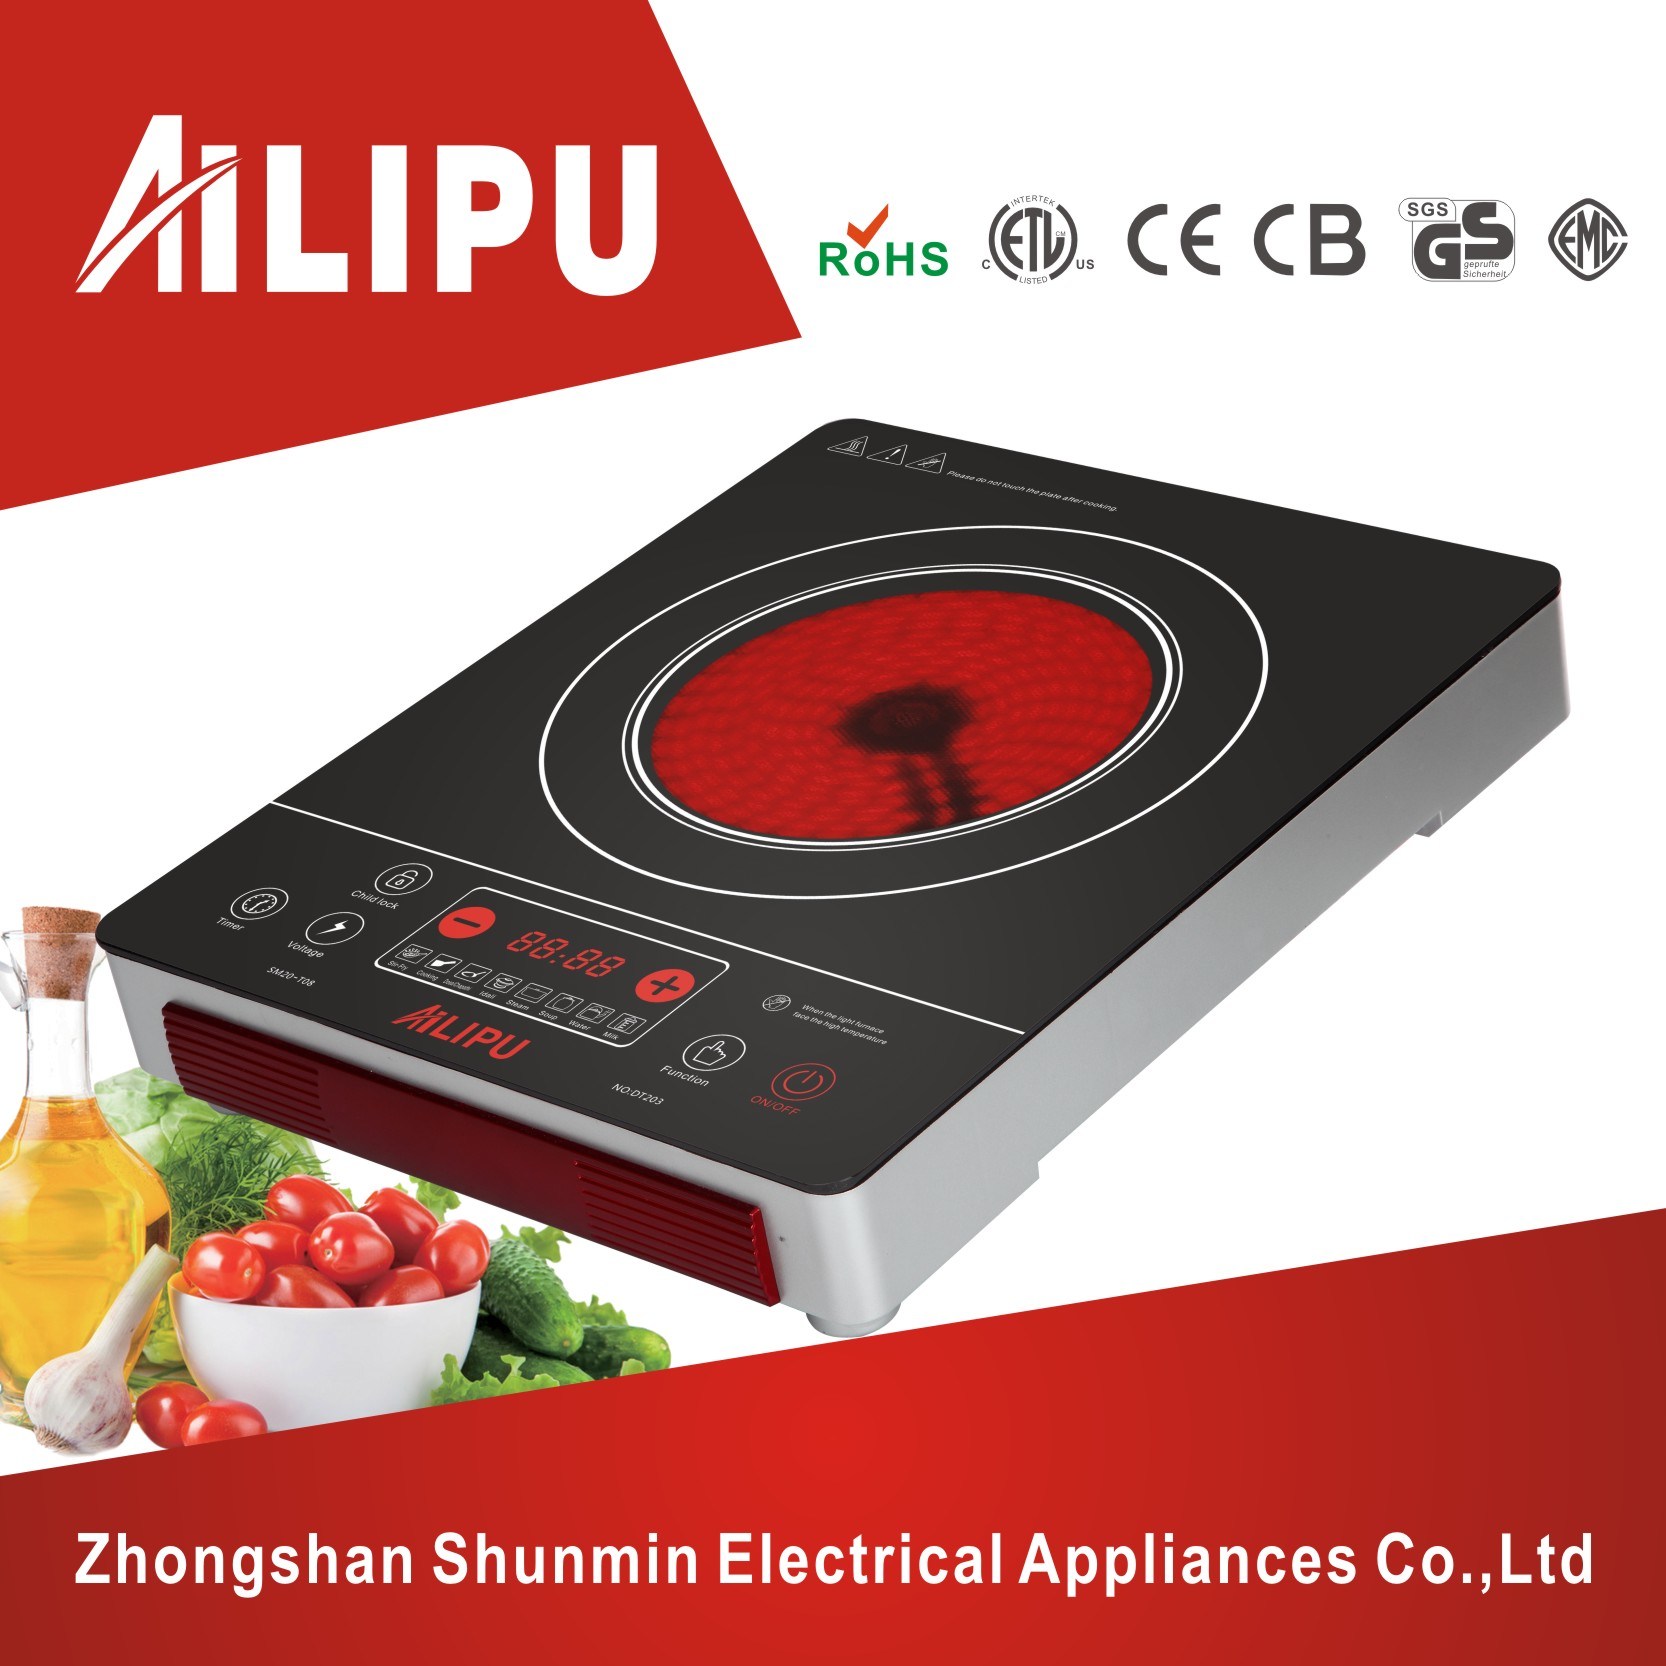 CE/CB Certificated Good Shape and Touch Screen Single Infrared Cooker/Infrared Stove/Ceramic Cooker